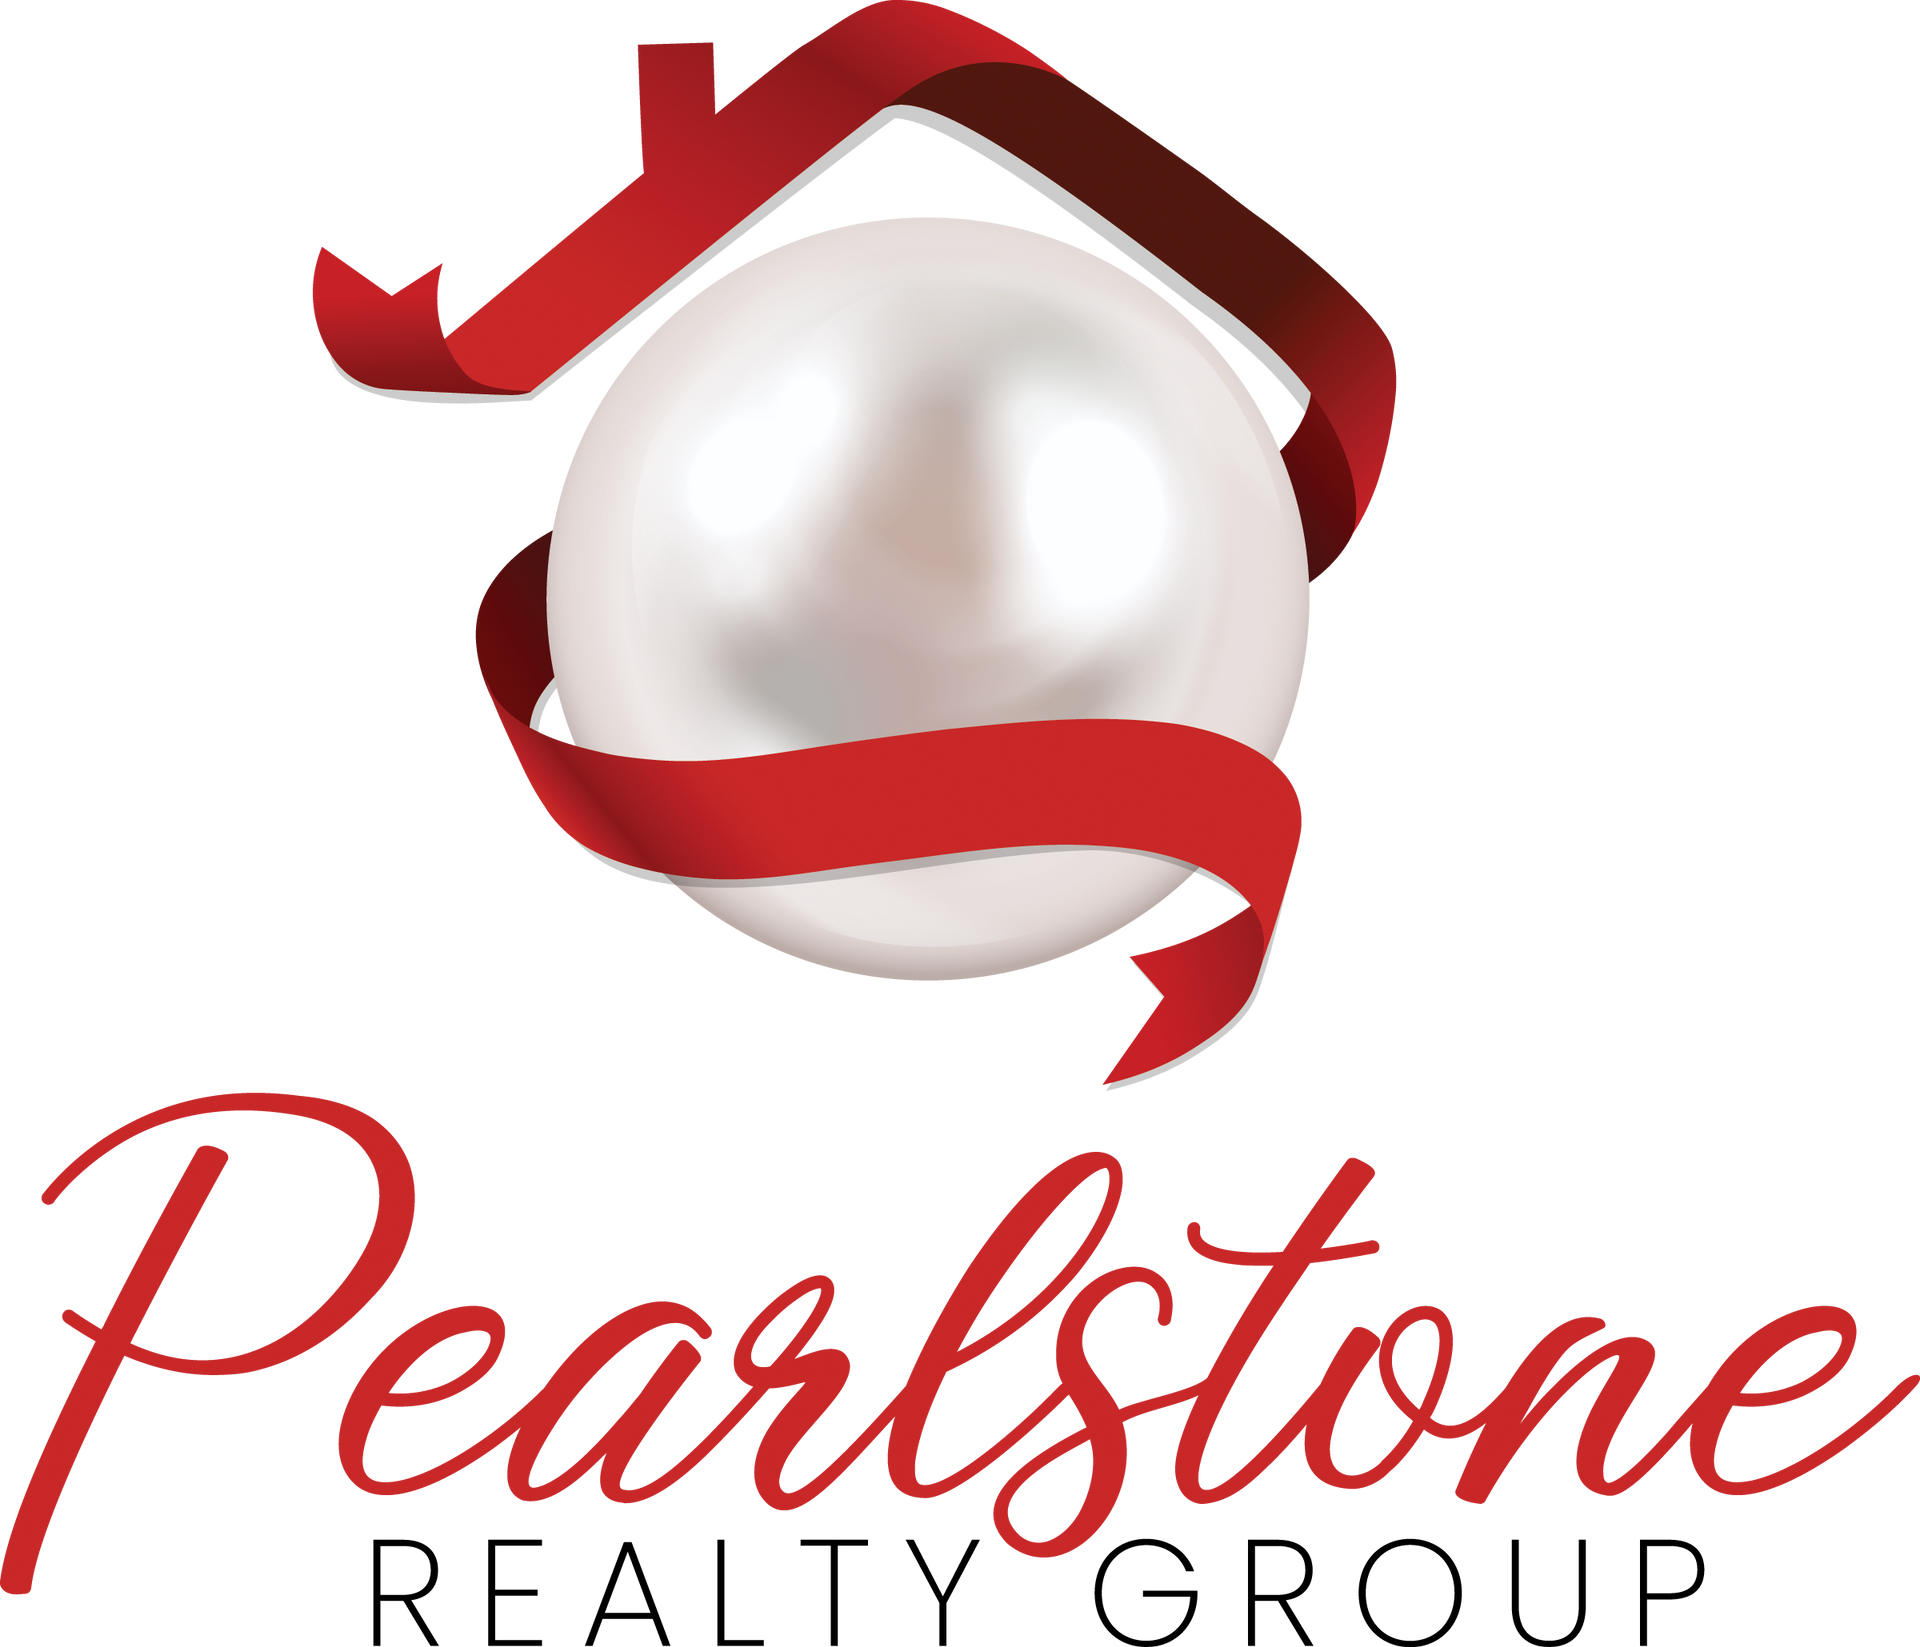 The logo for pearlstone realty group shows a pearl with a red ribbon around it.